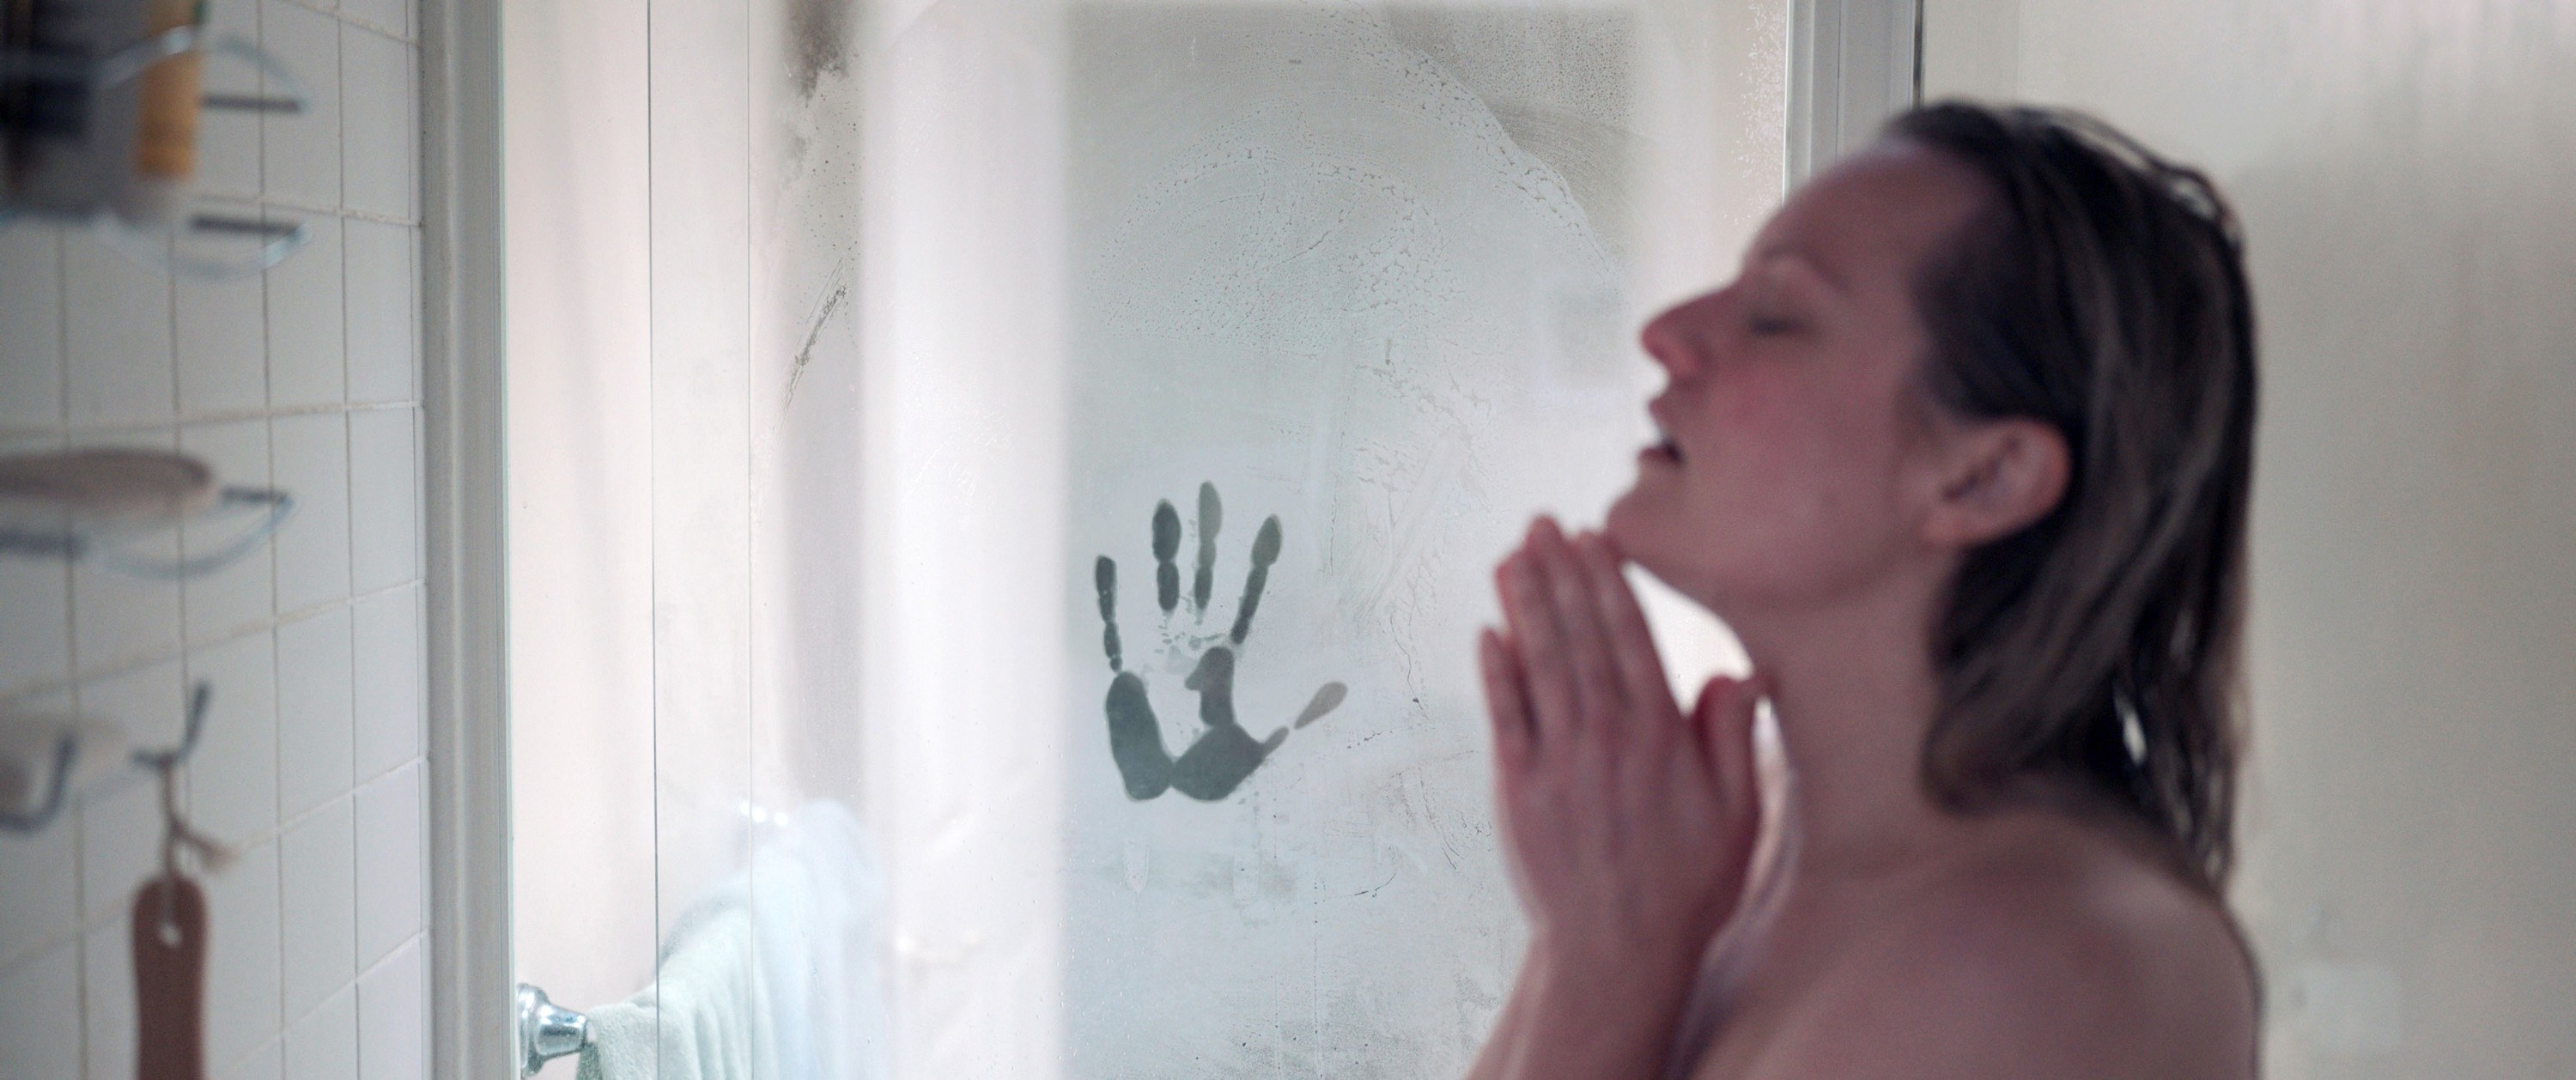 A woman in a shower with a mysterious handprint on the glass behind her